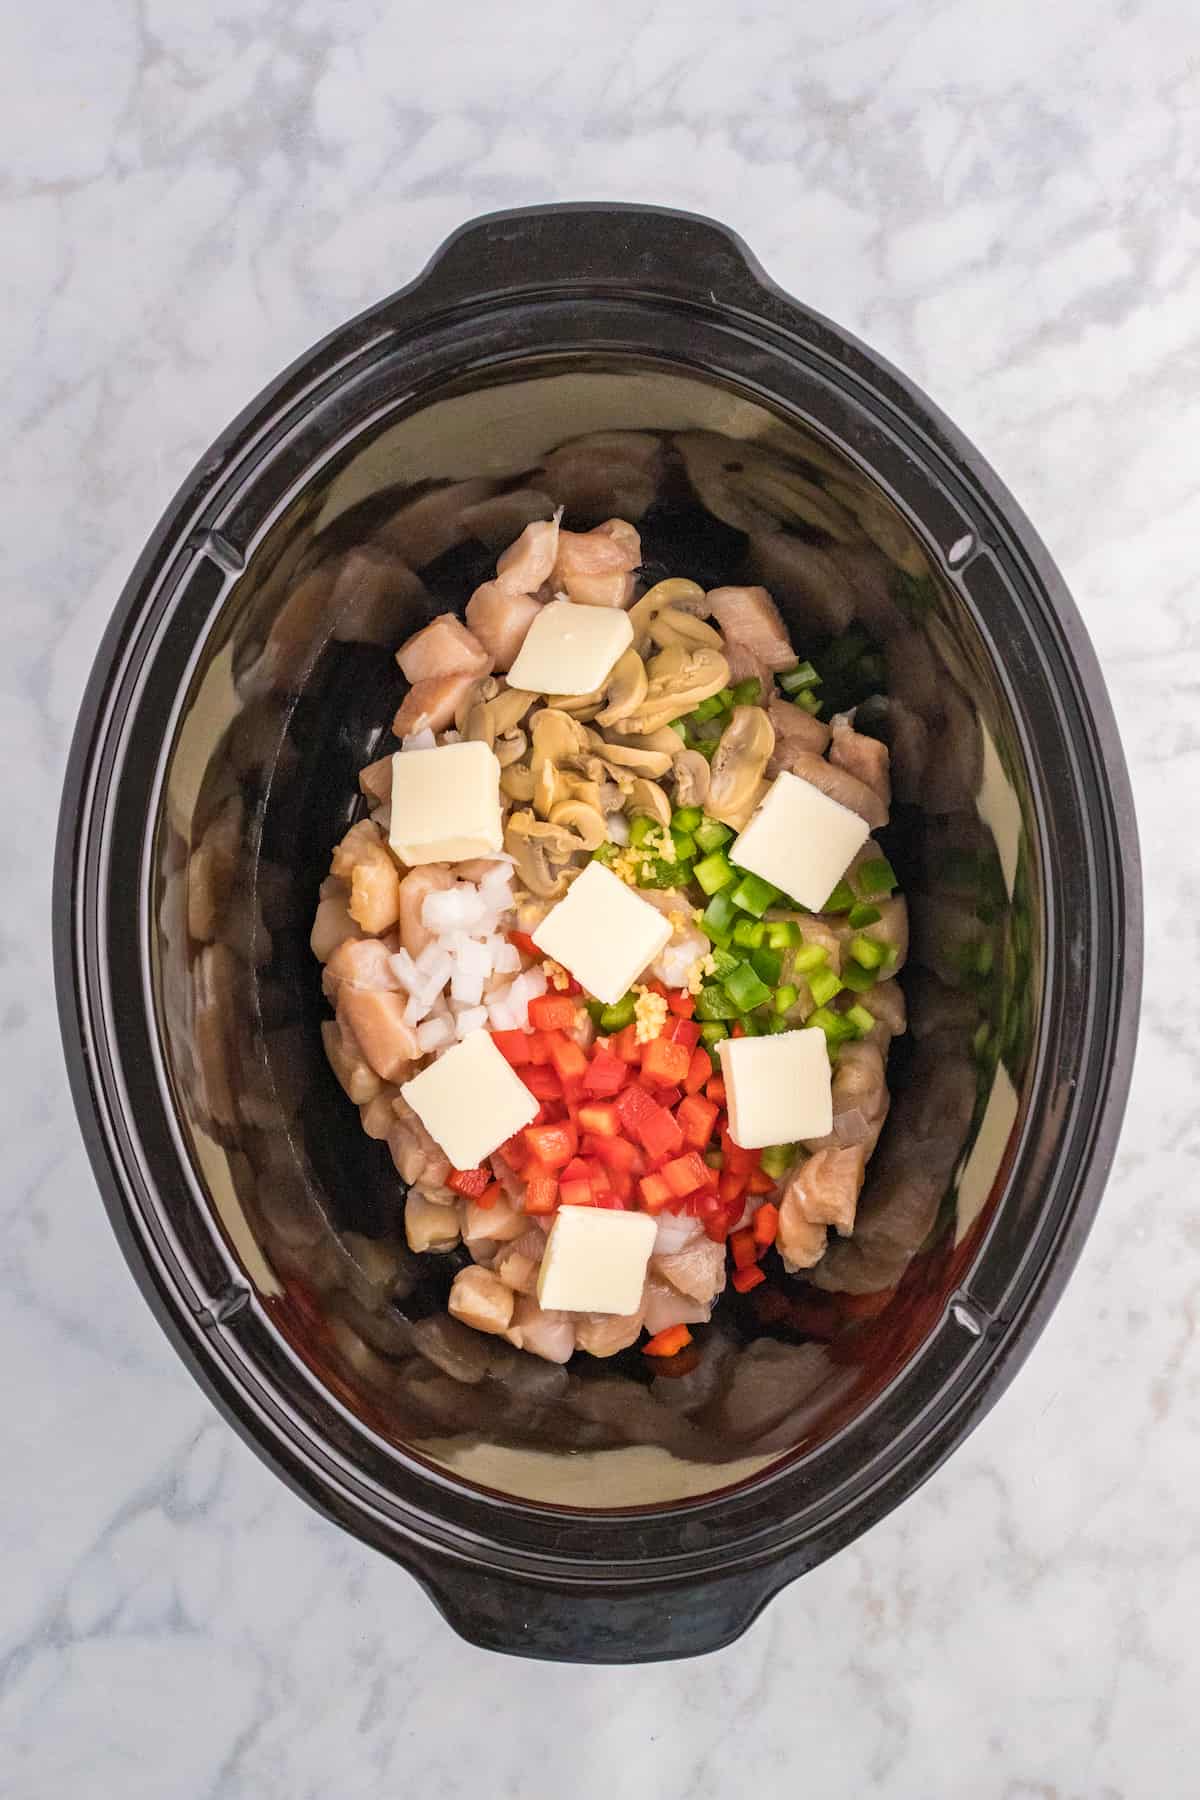 A Slow Cooker filled with vegetables and chicken a la King.